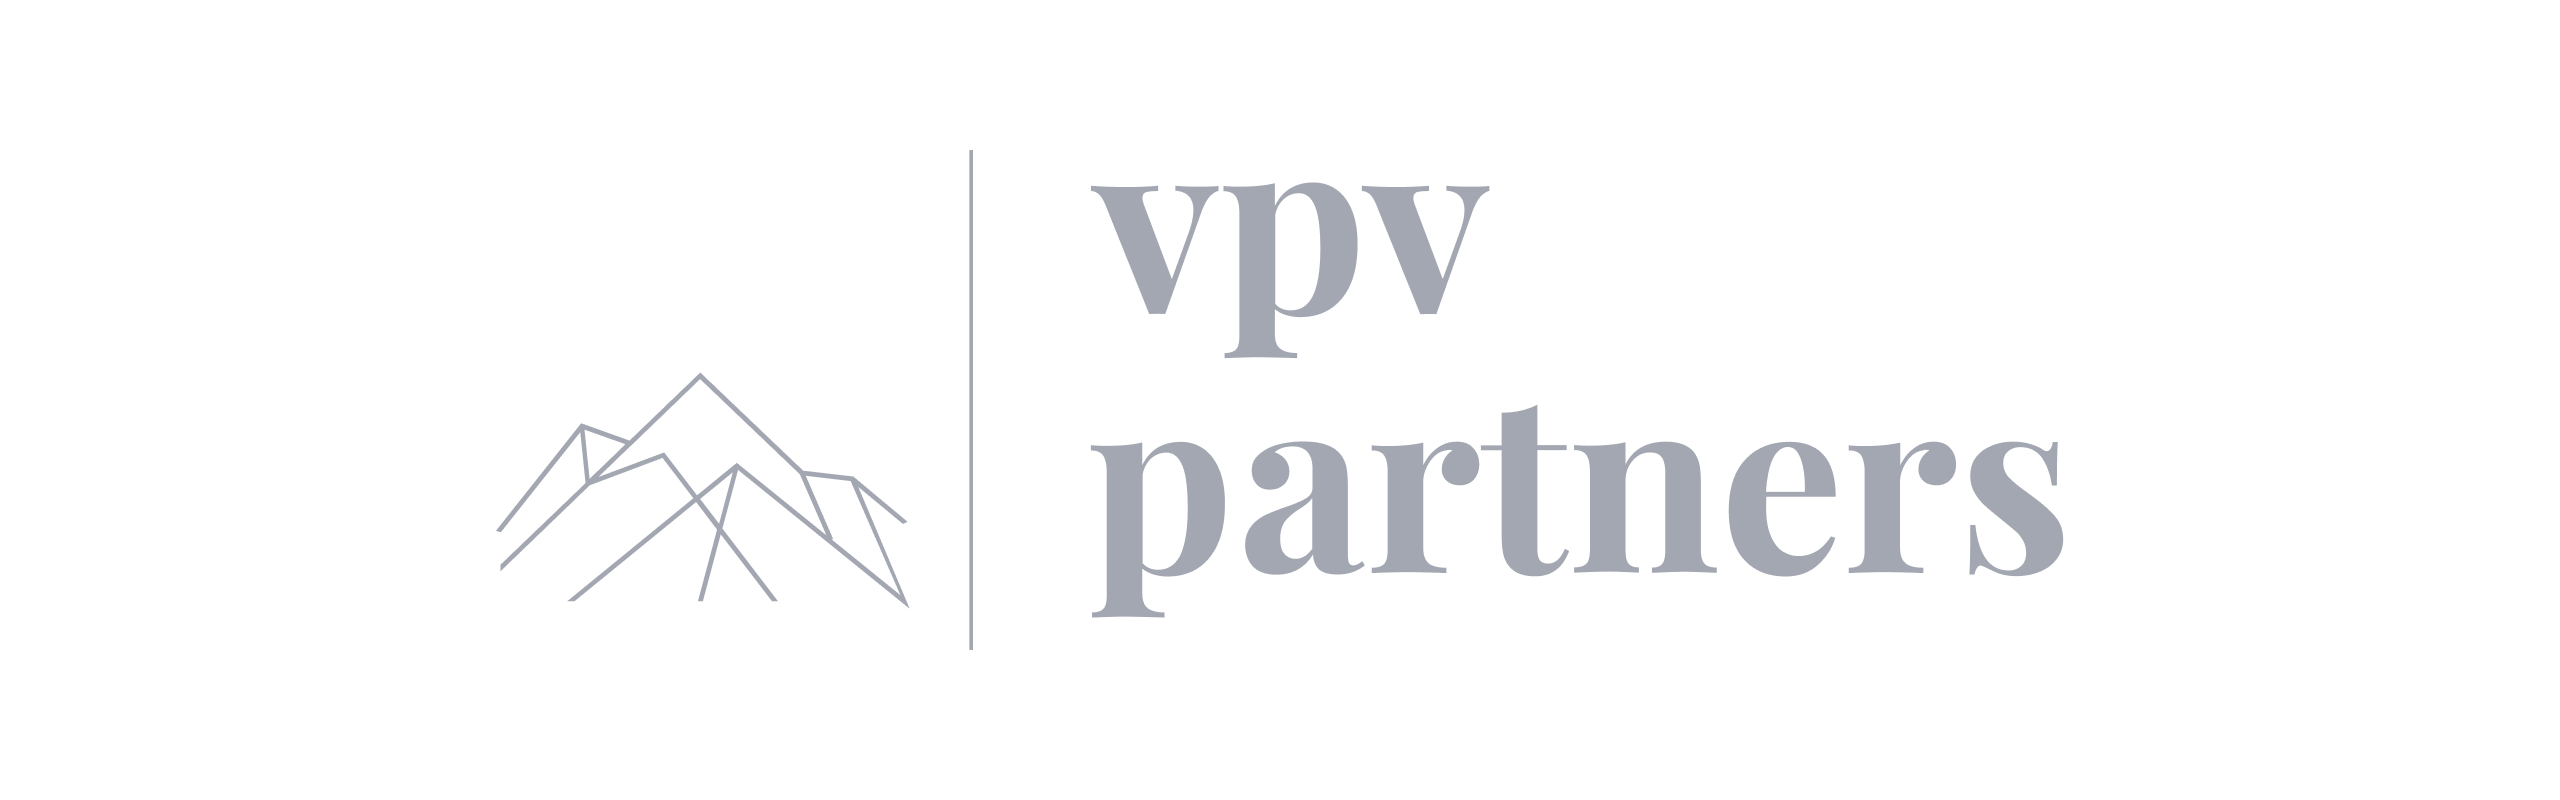 Technology & product due diligence | Code & Co. advises VPV PARTNERS (logo shown)